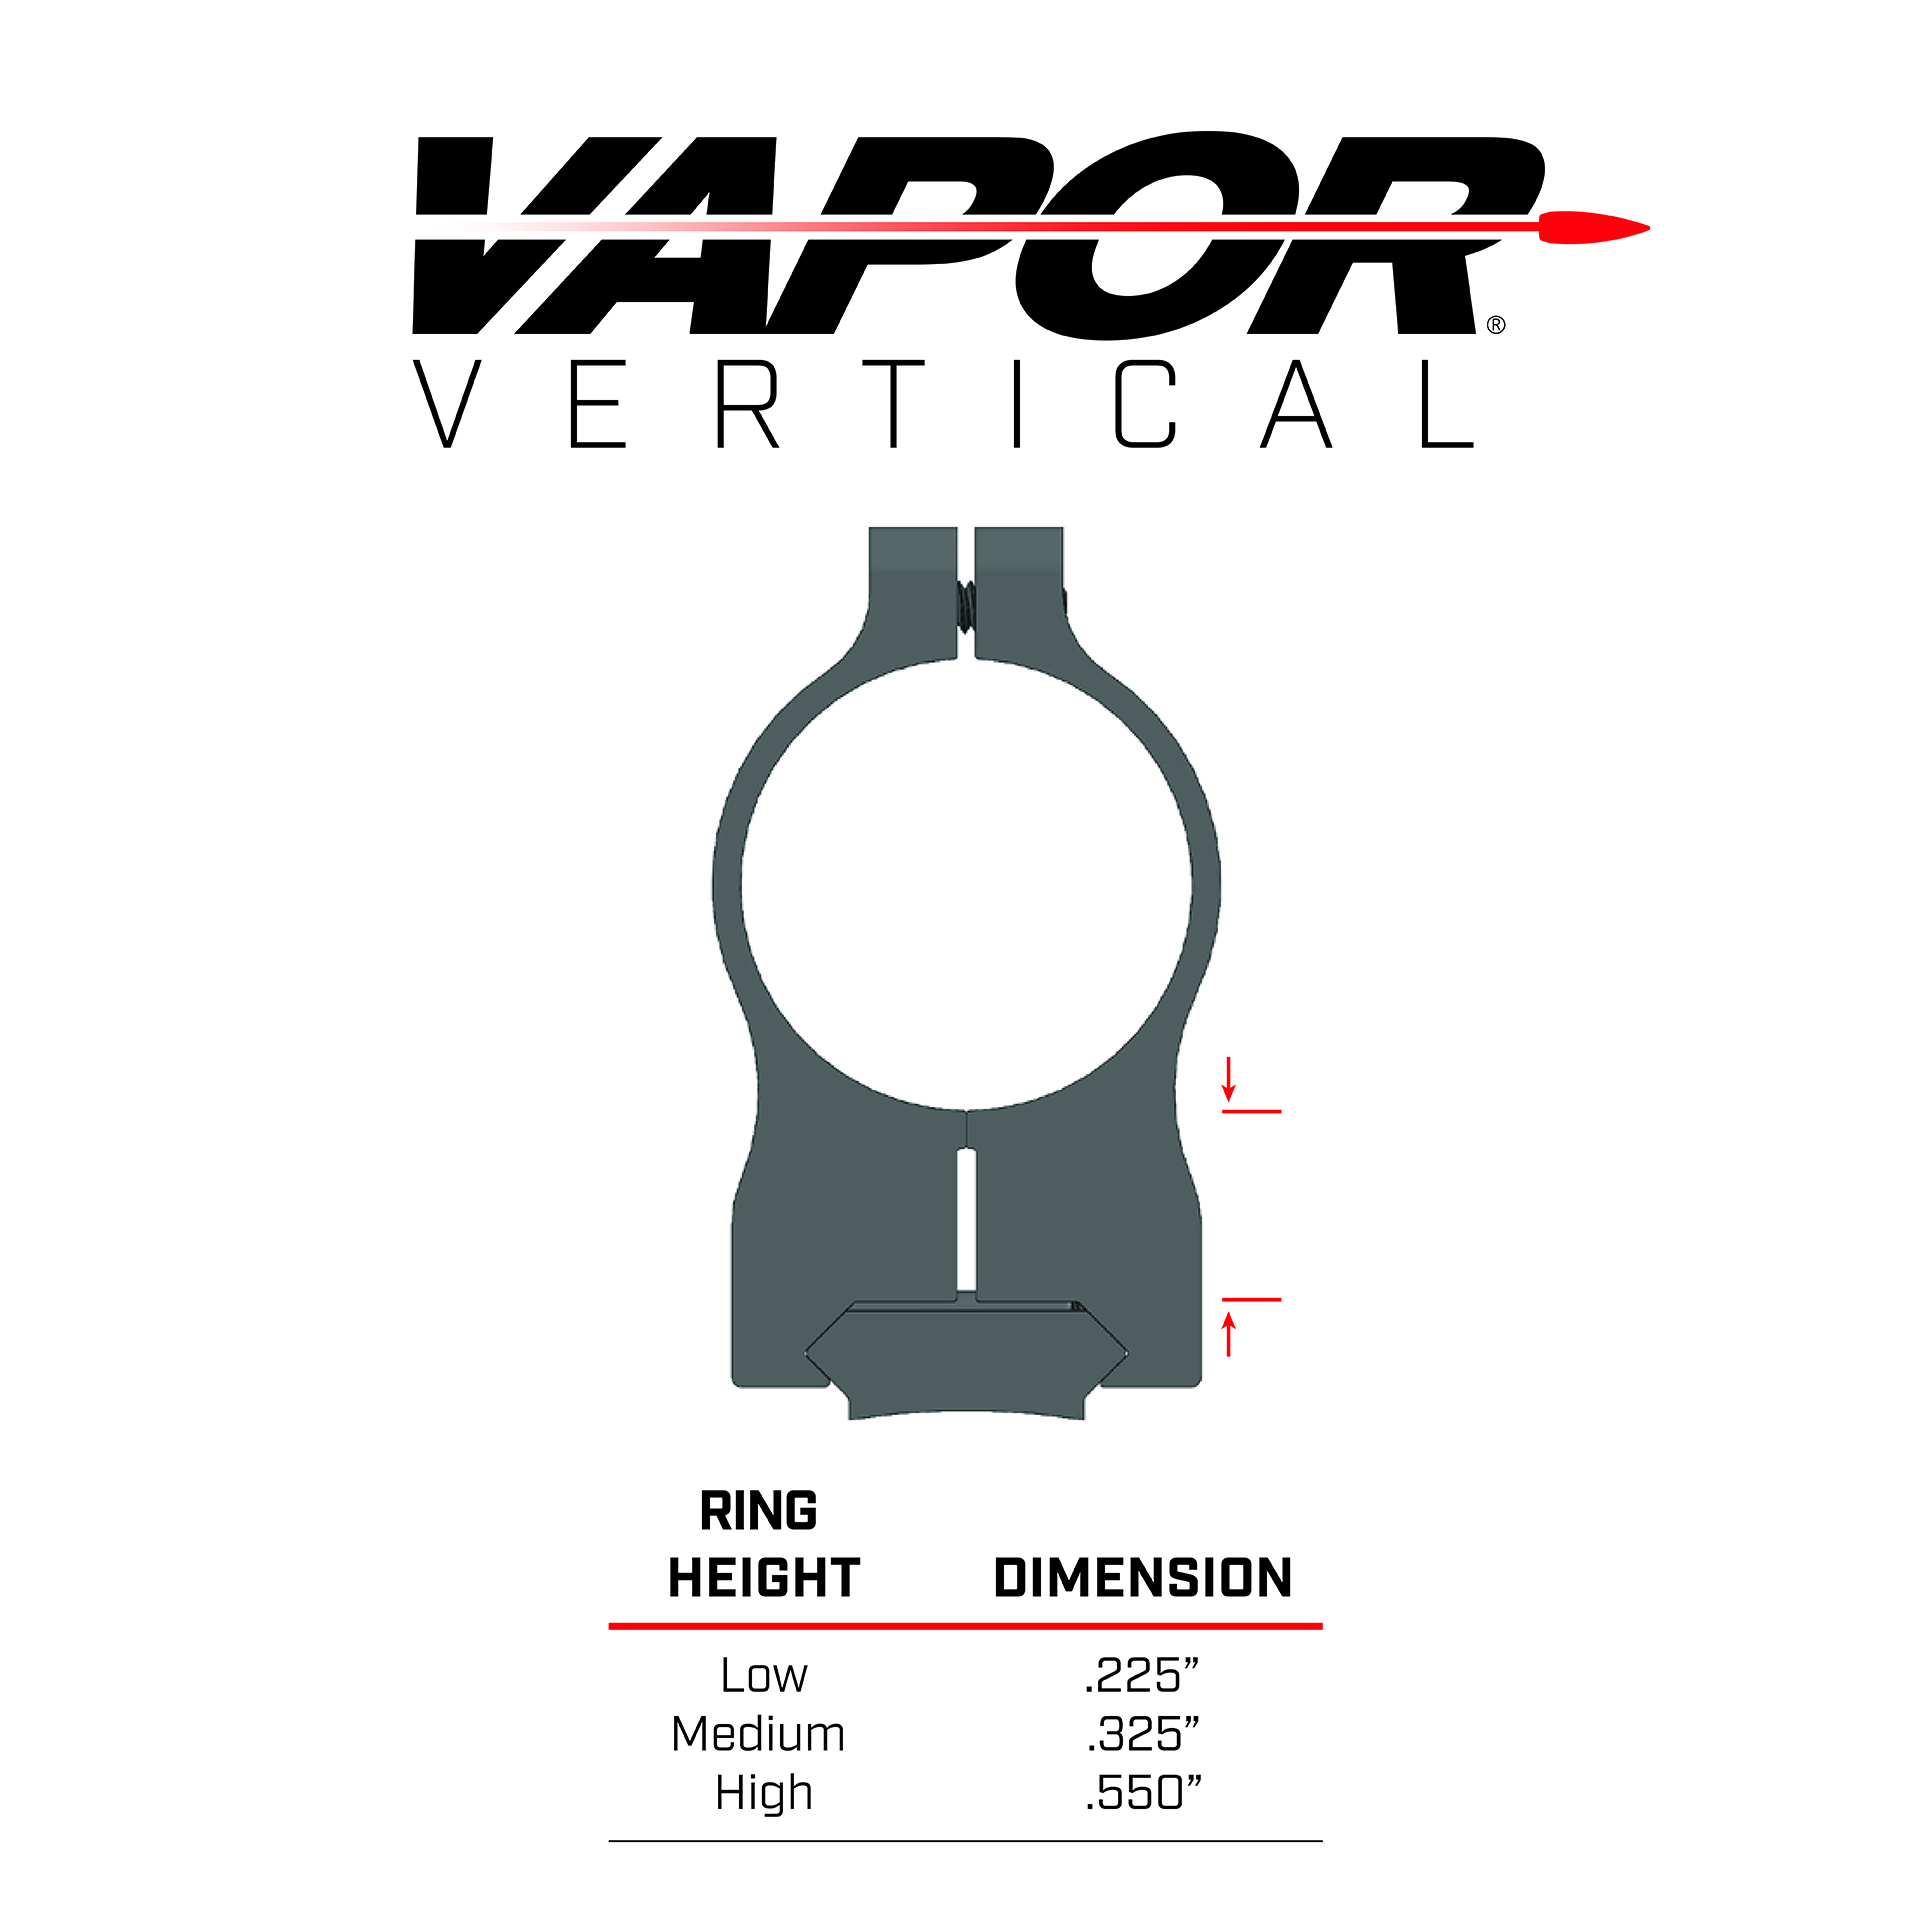 height for vapor vertical scope rings. low .225 inch, med .325 inch, high .550 inch